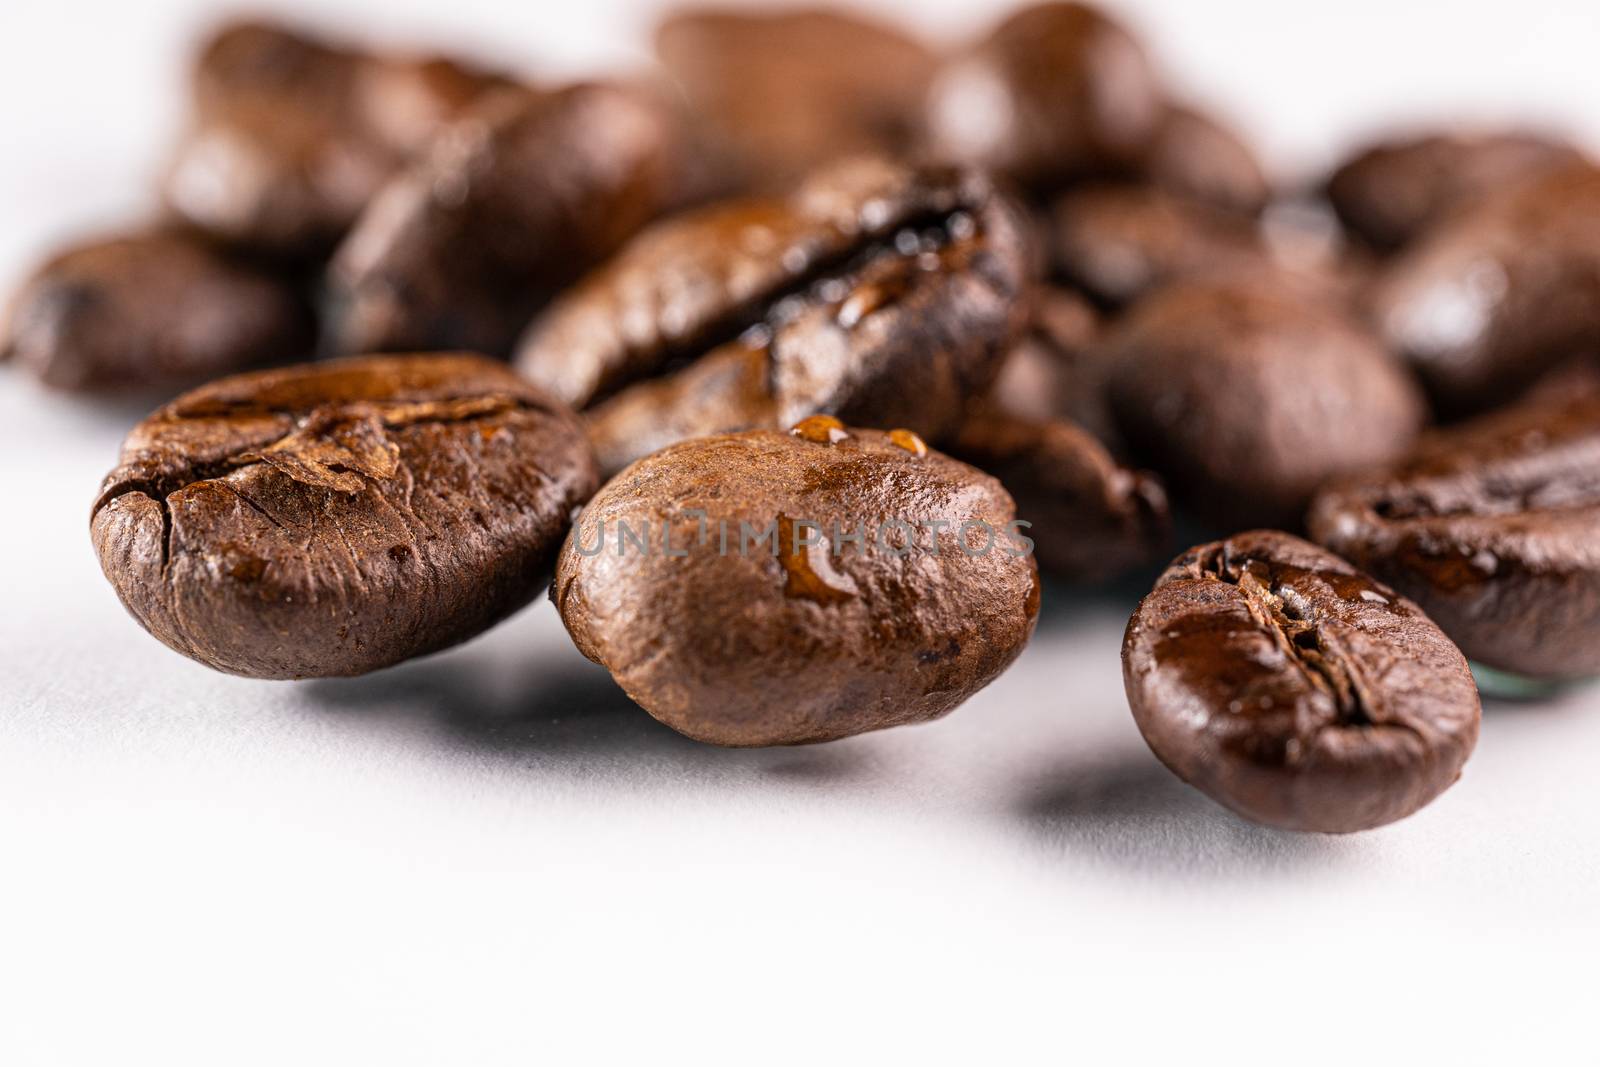 Macro view of roasted coffee beans on white background